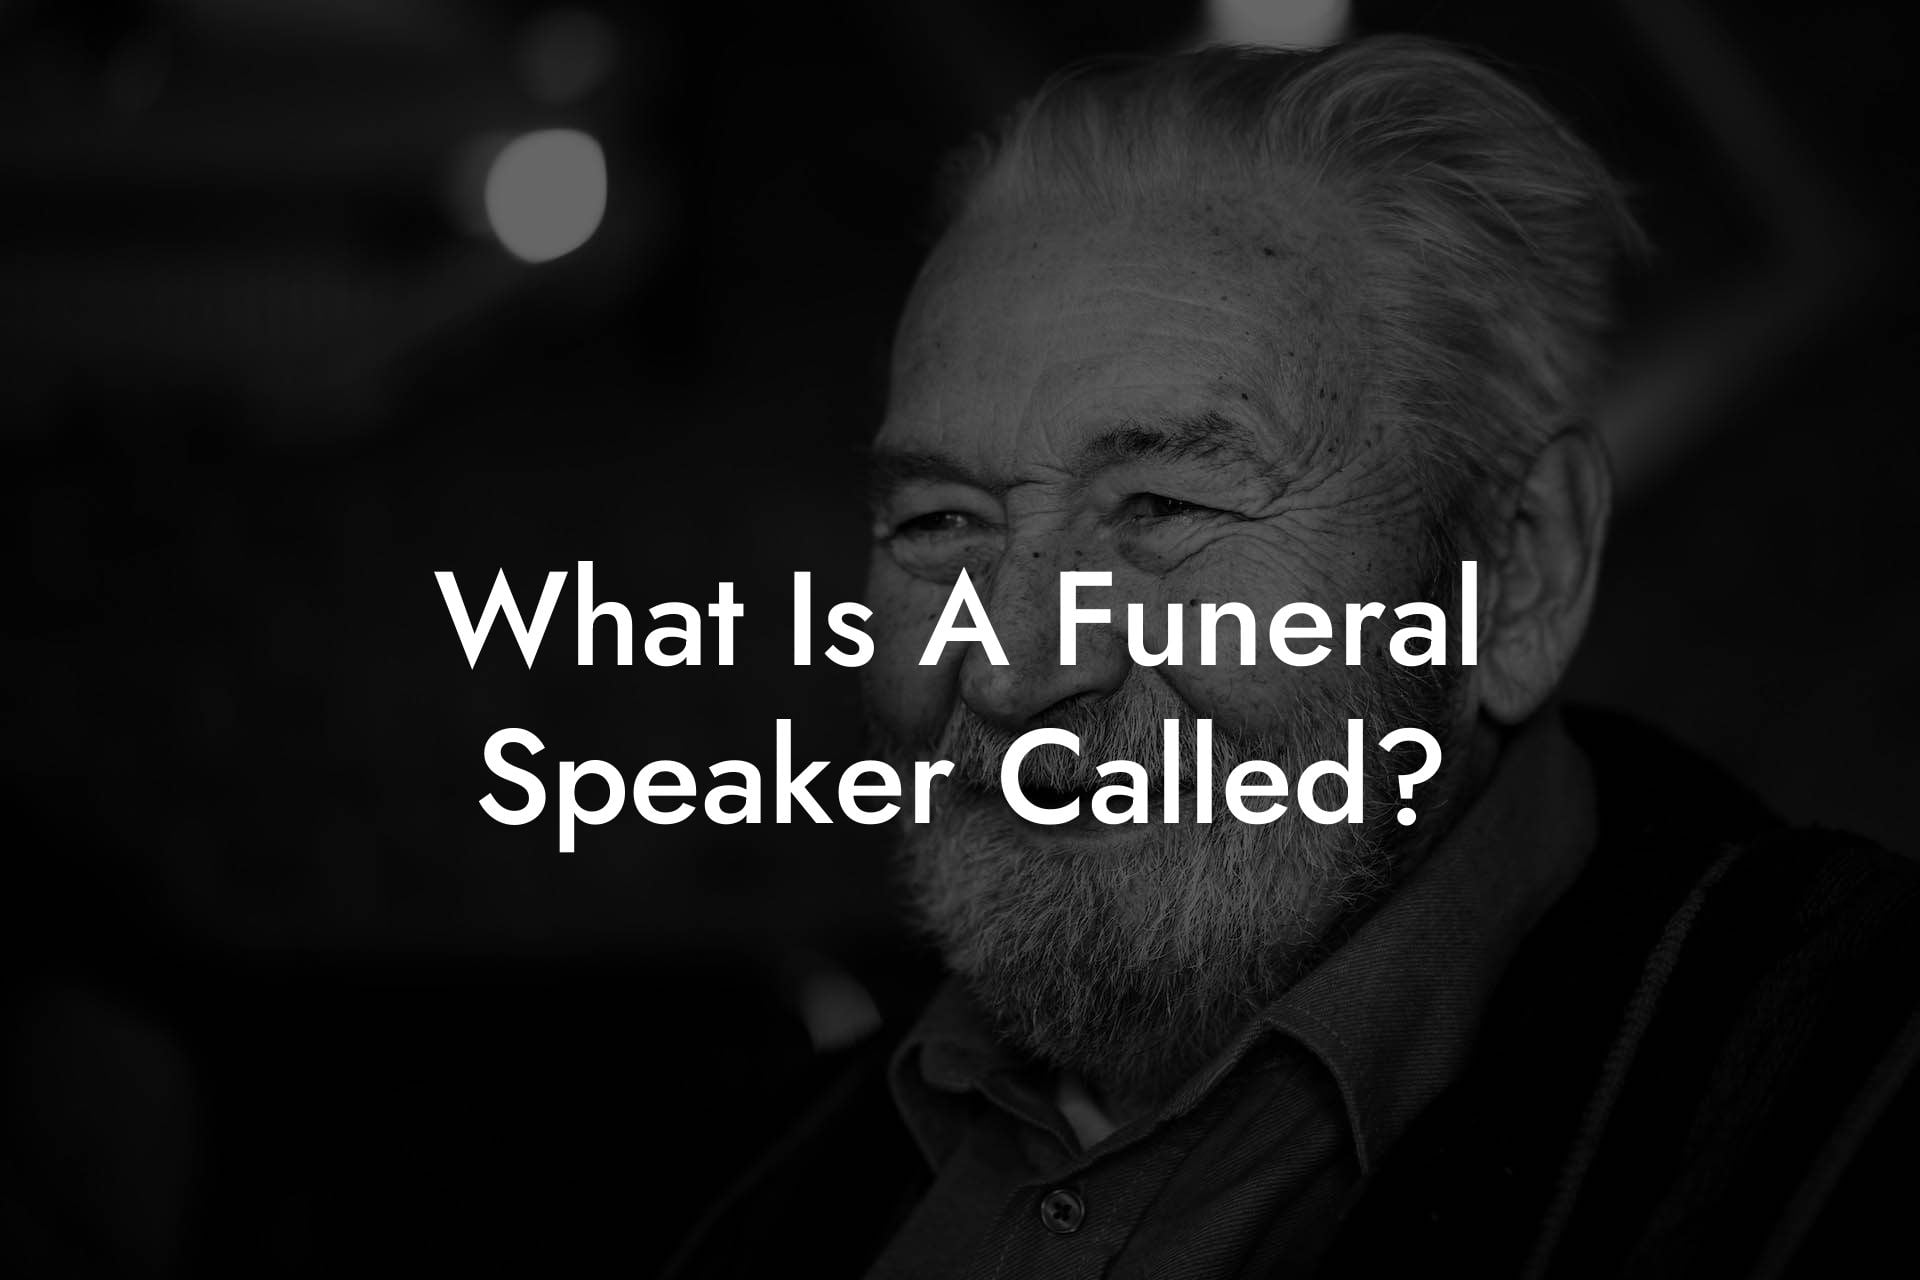 What Is A Funeral Speaker Called?